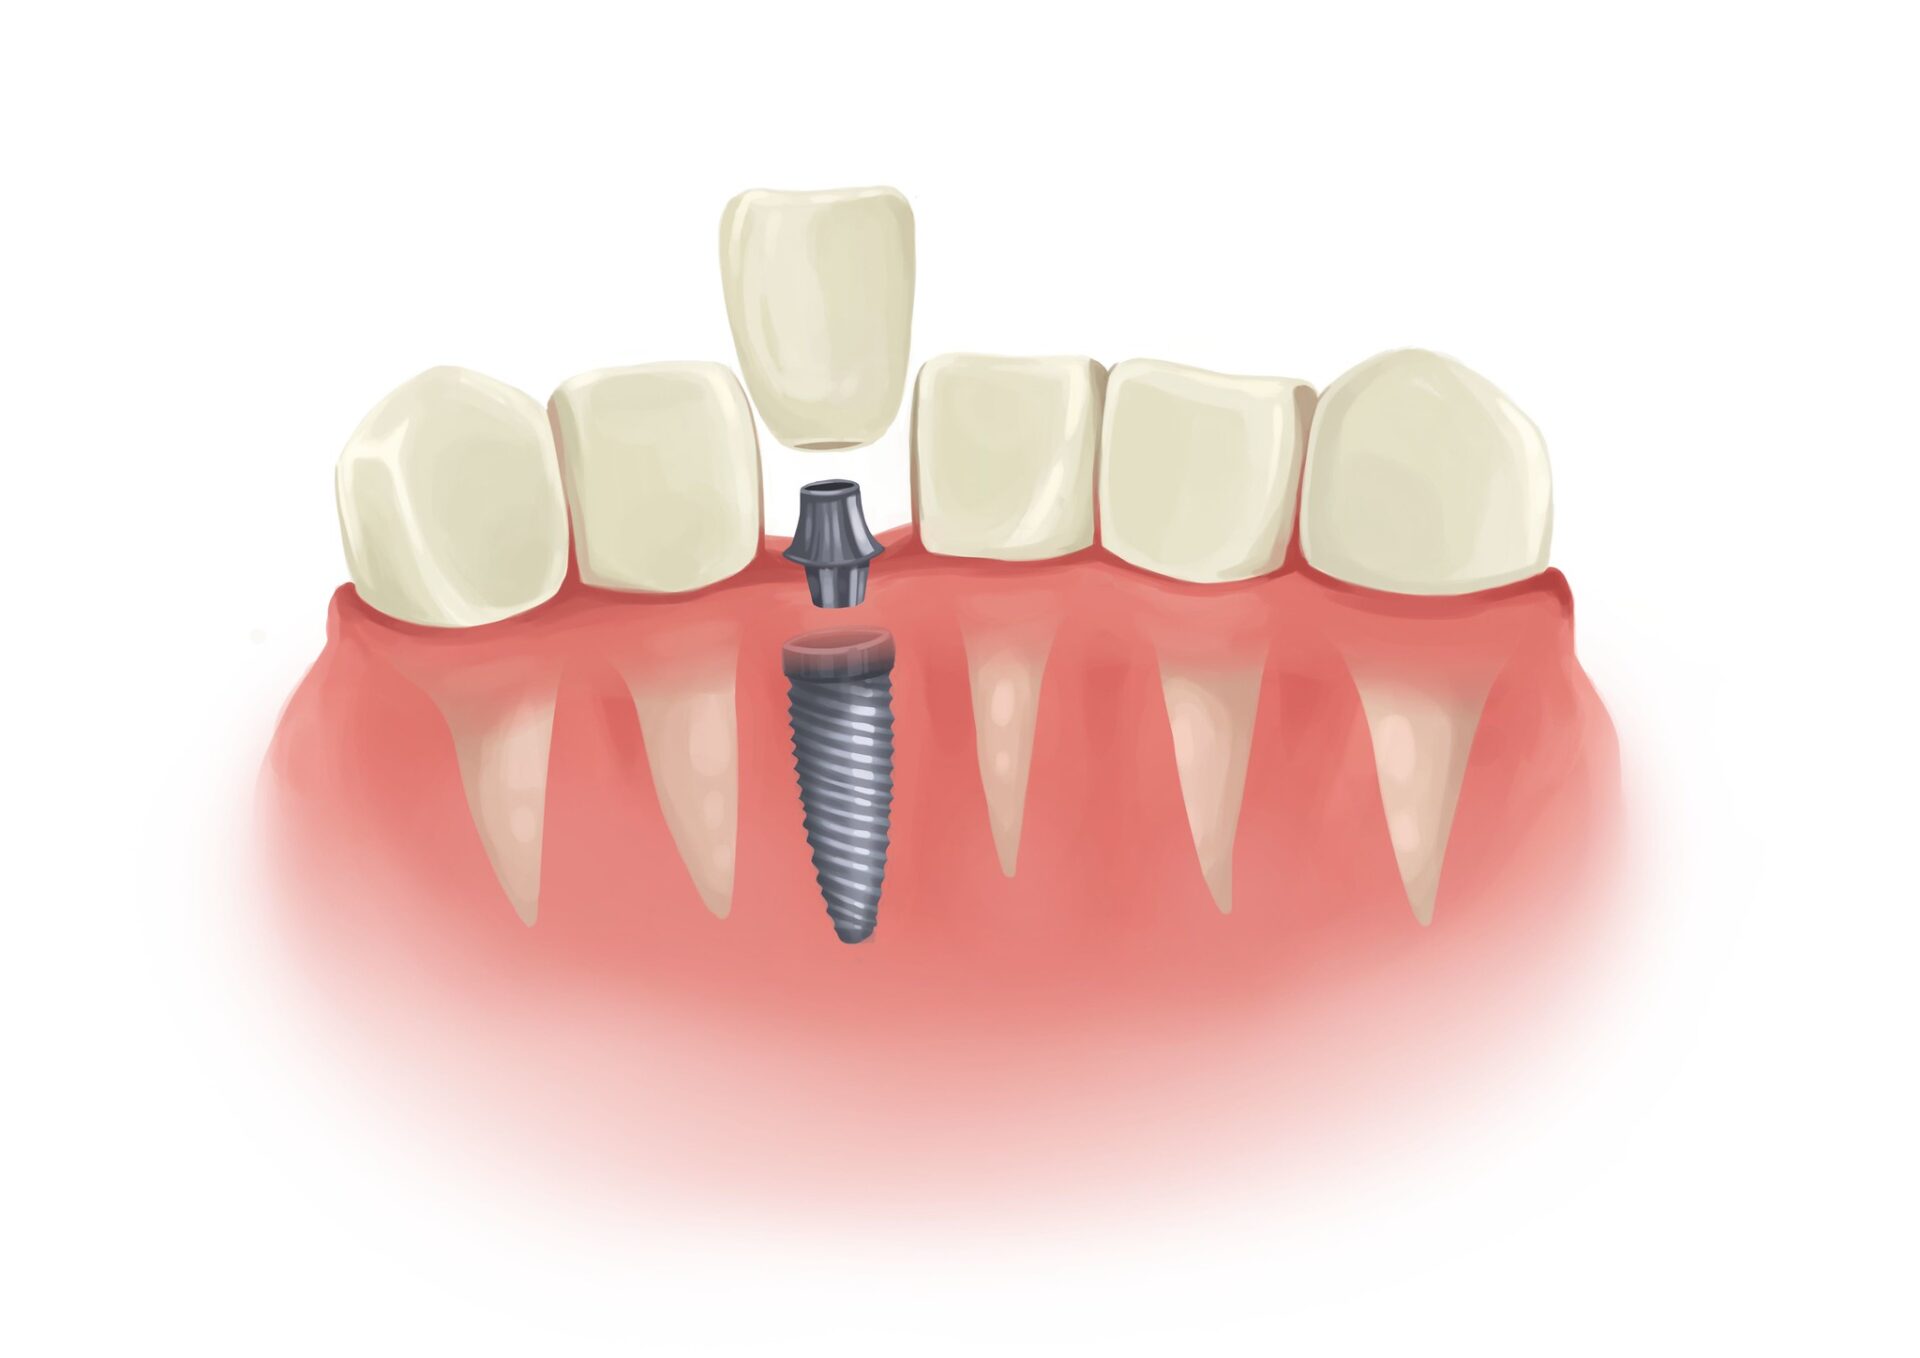 Technical graphic illustration of a dental implant.